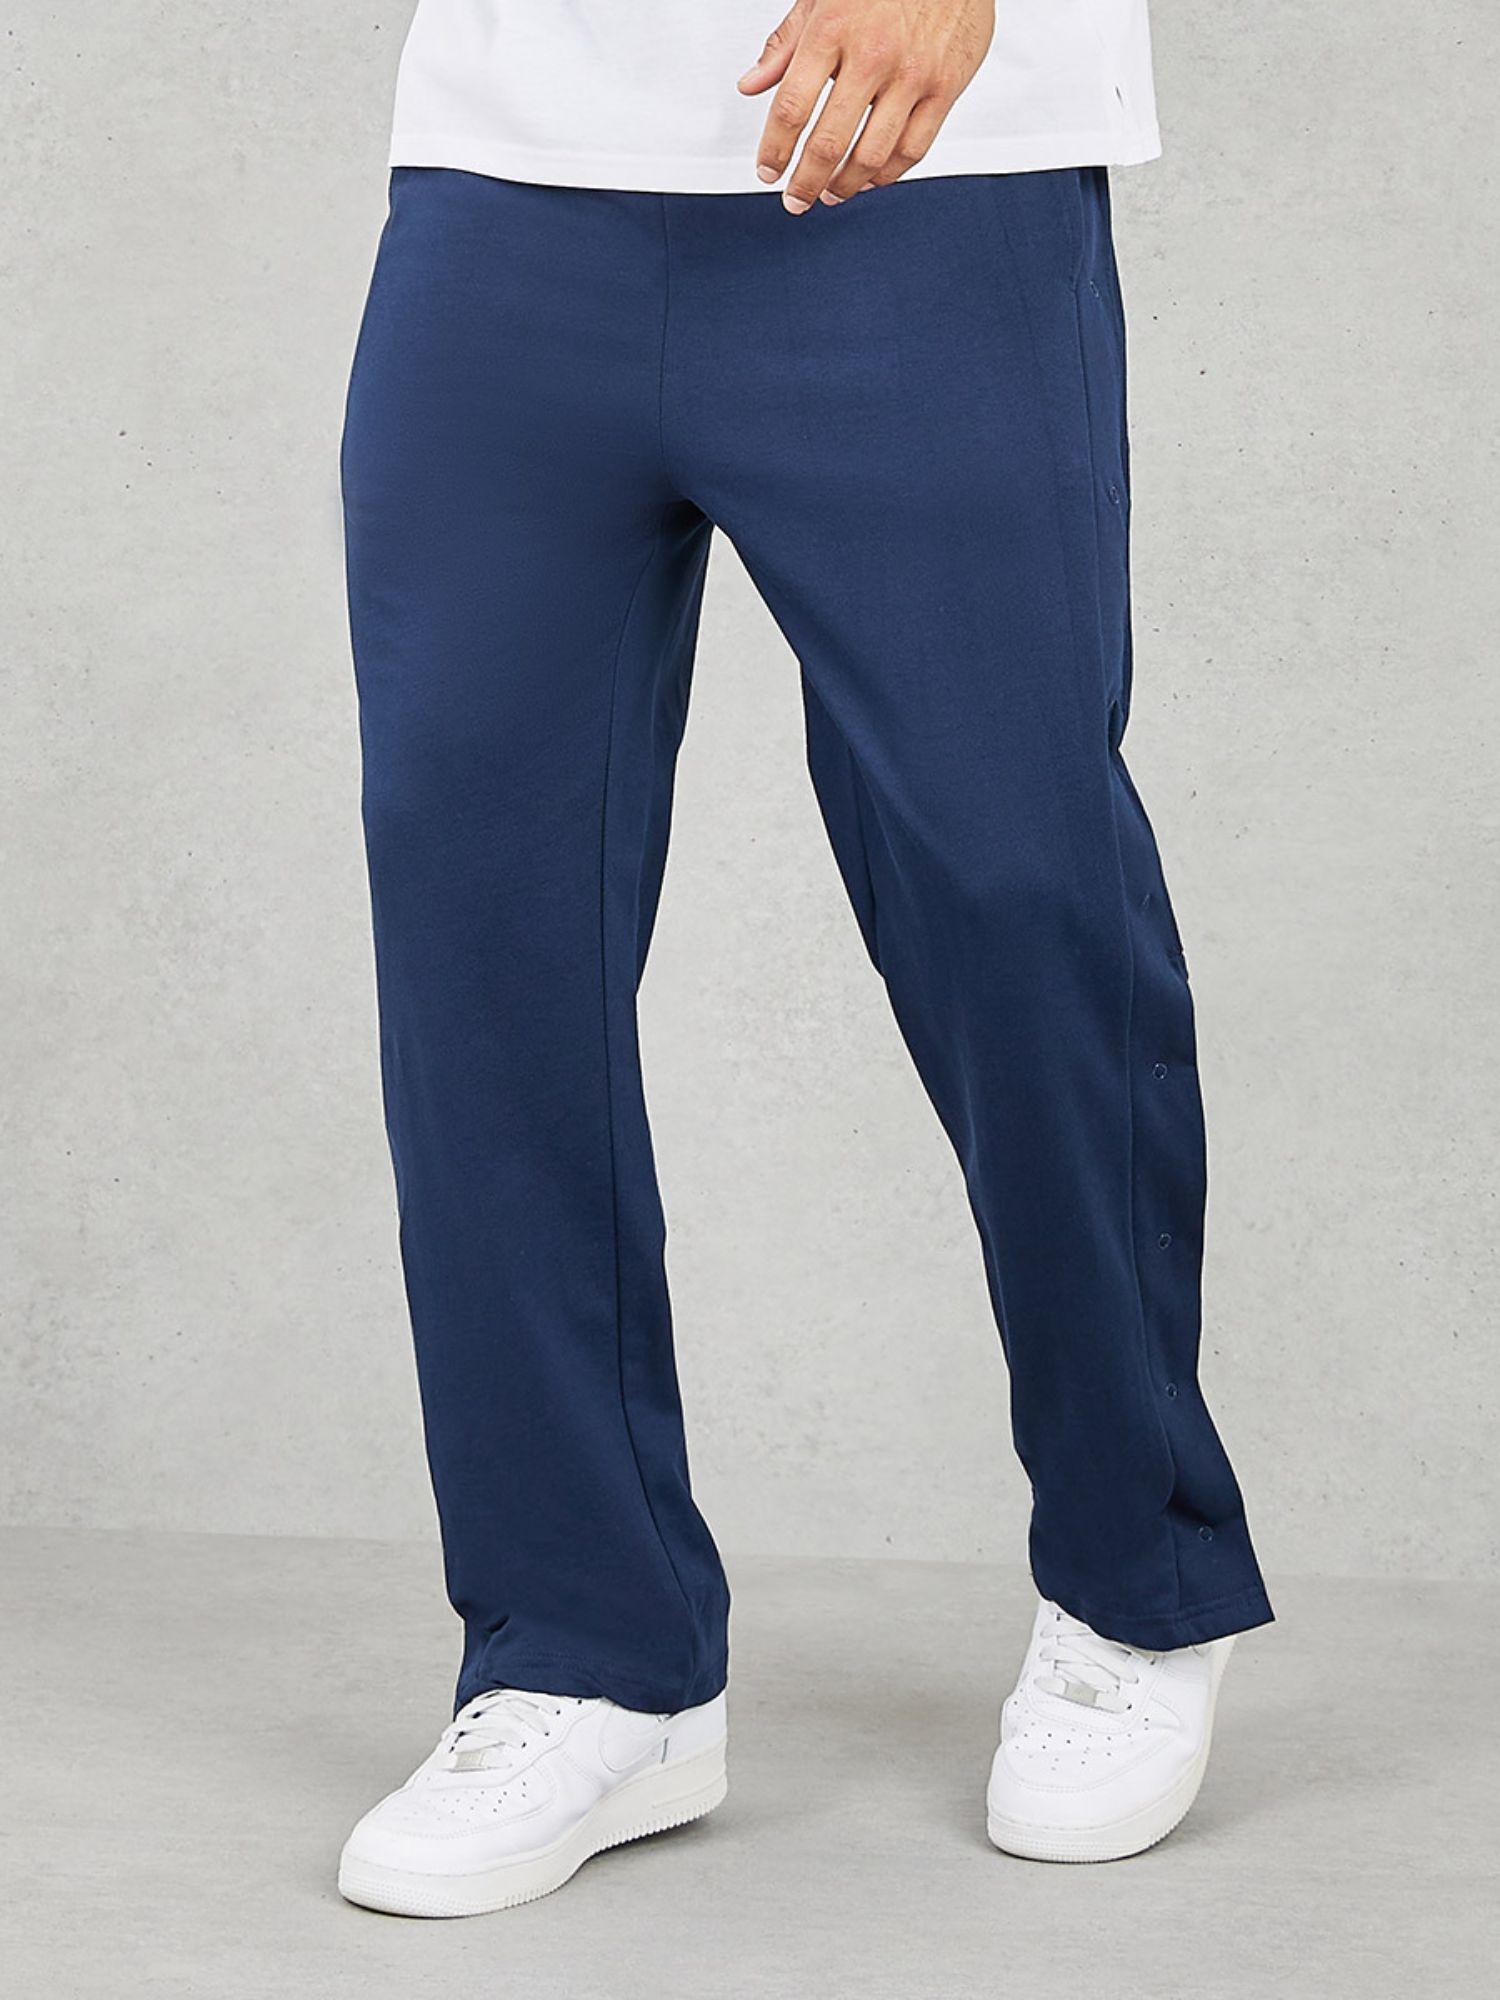 men's navy blue cotton oversized straight leg jogger with popper button